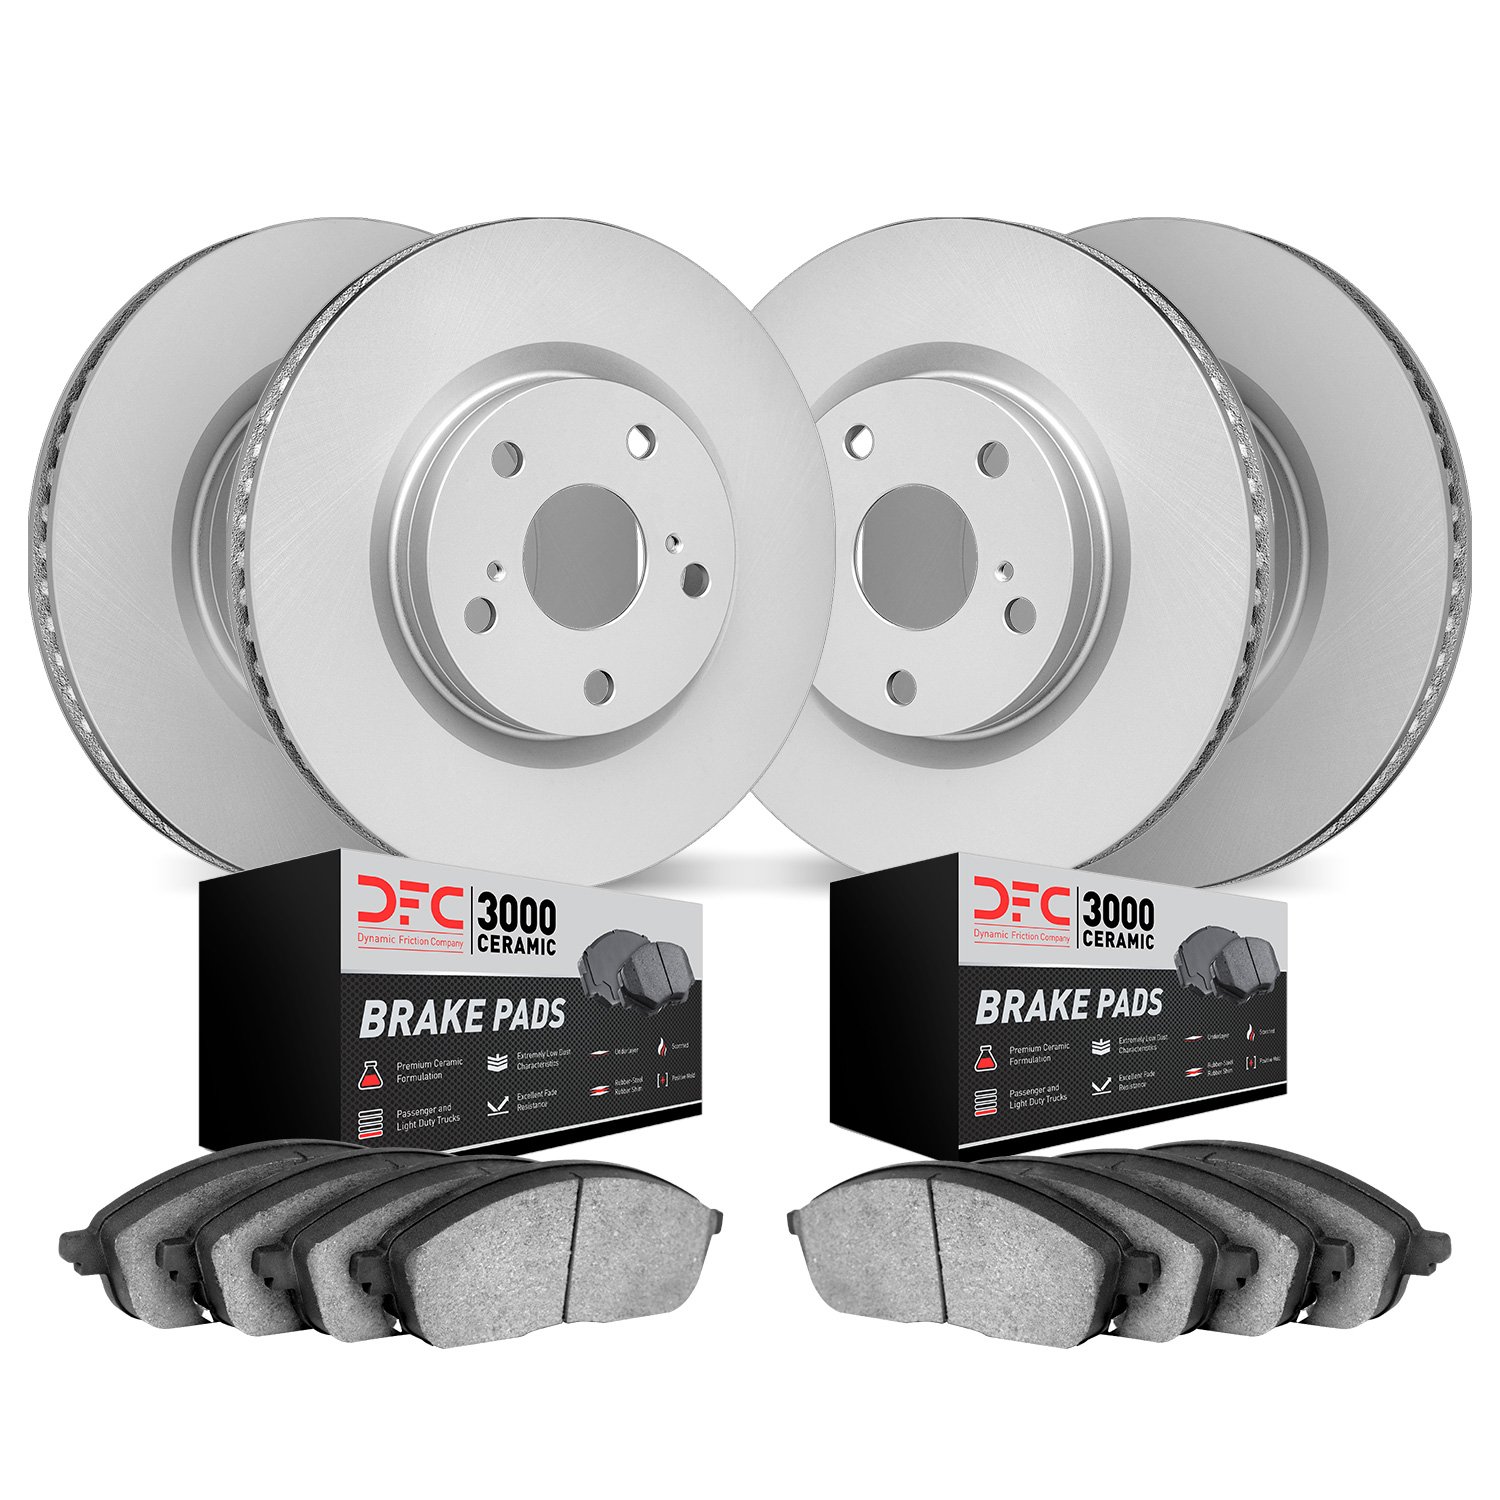 4304-31057 Geospec Brake Rotors with 3000-Series Ceramic Brake Pads Kit, 2011-2018 BMW, Position: Front and Rear